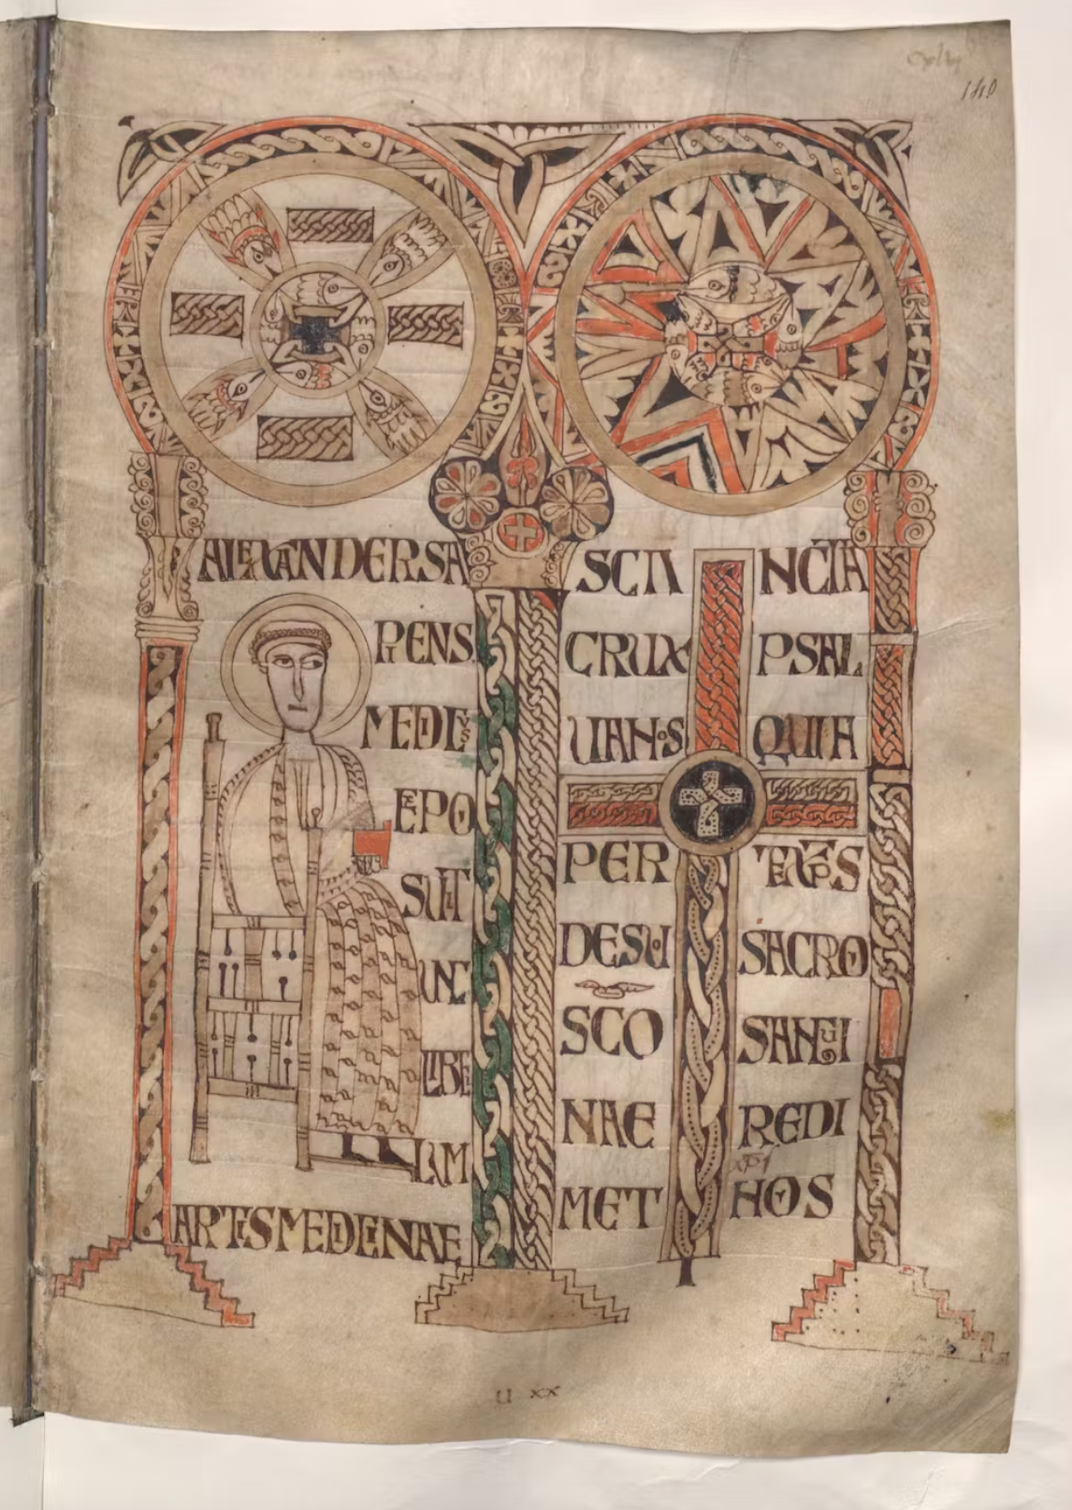 This ninth-century manuscript juxtaposes a physician with Jesus’s cross.